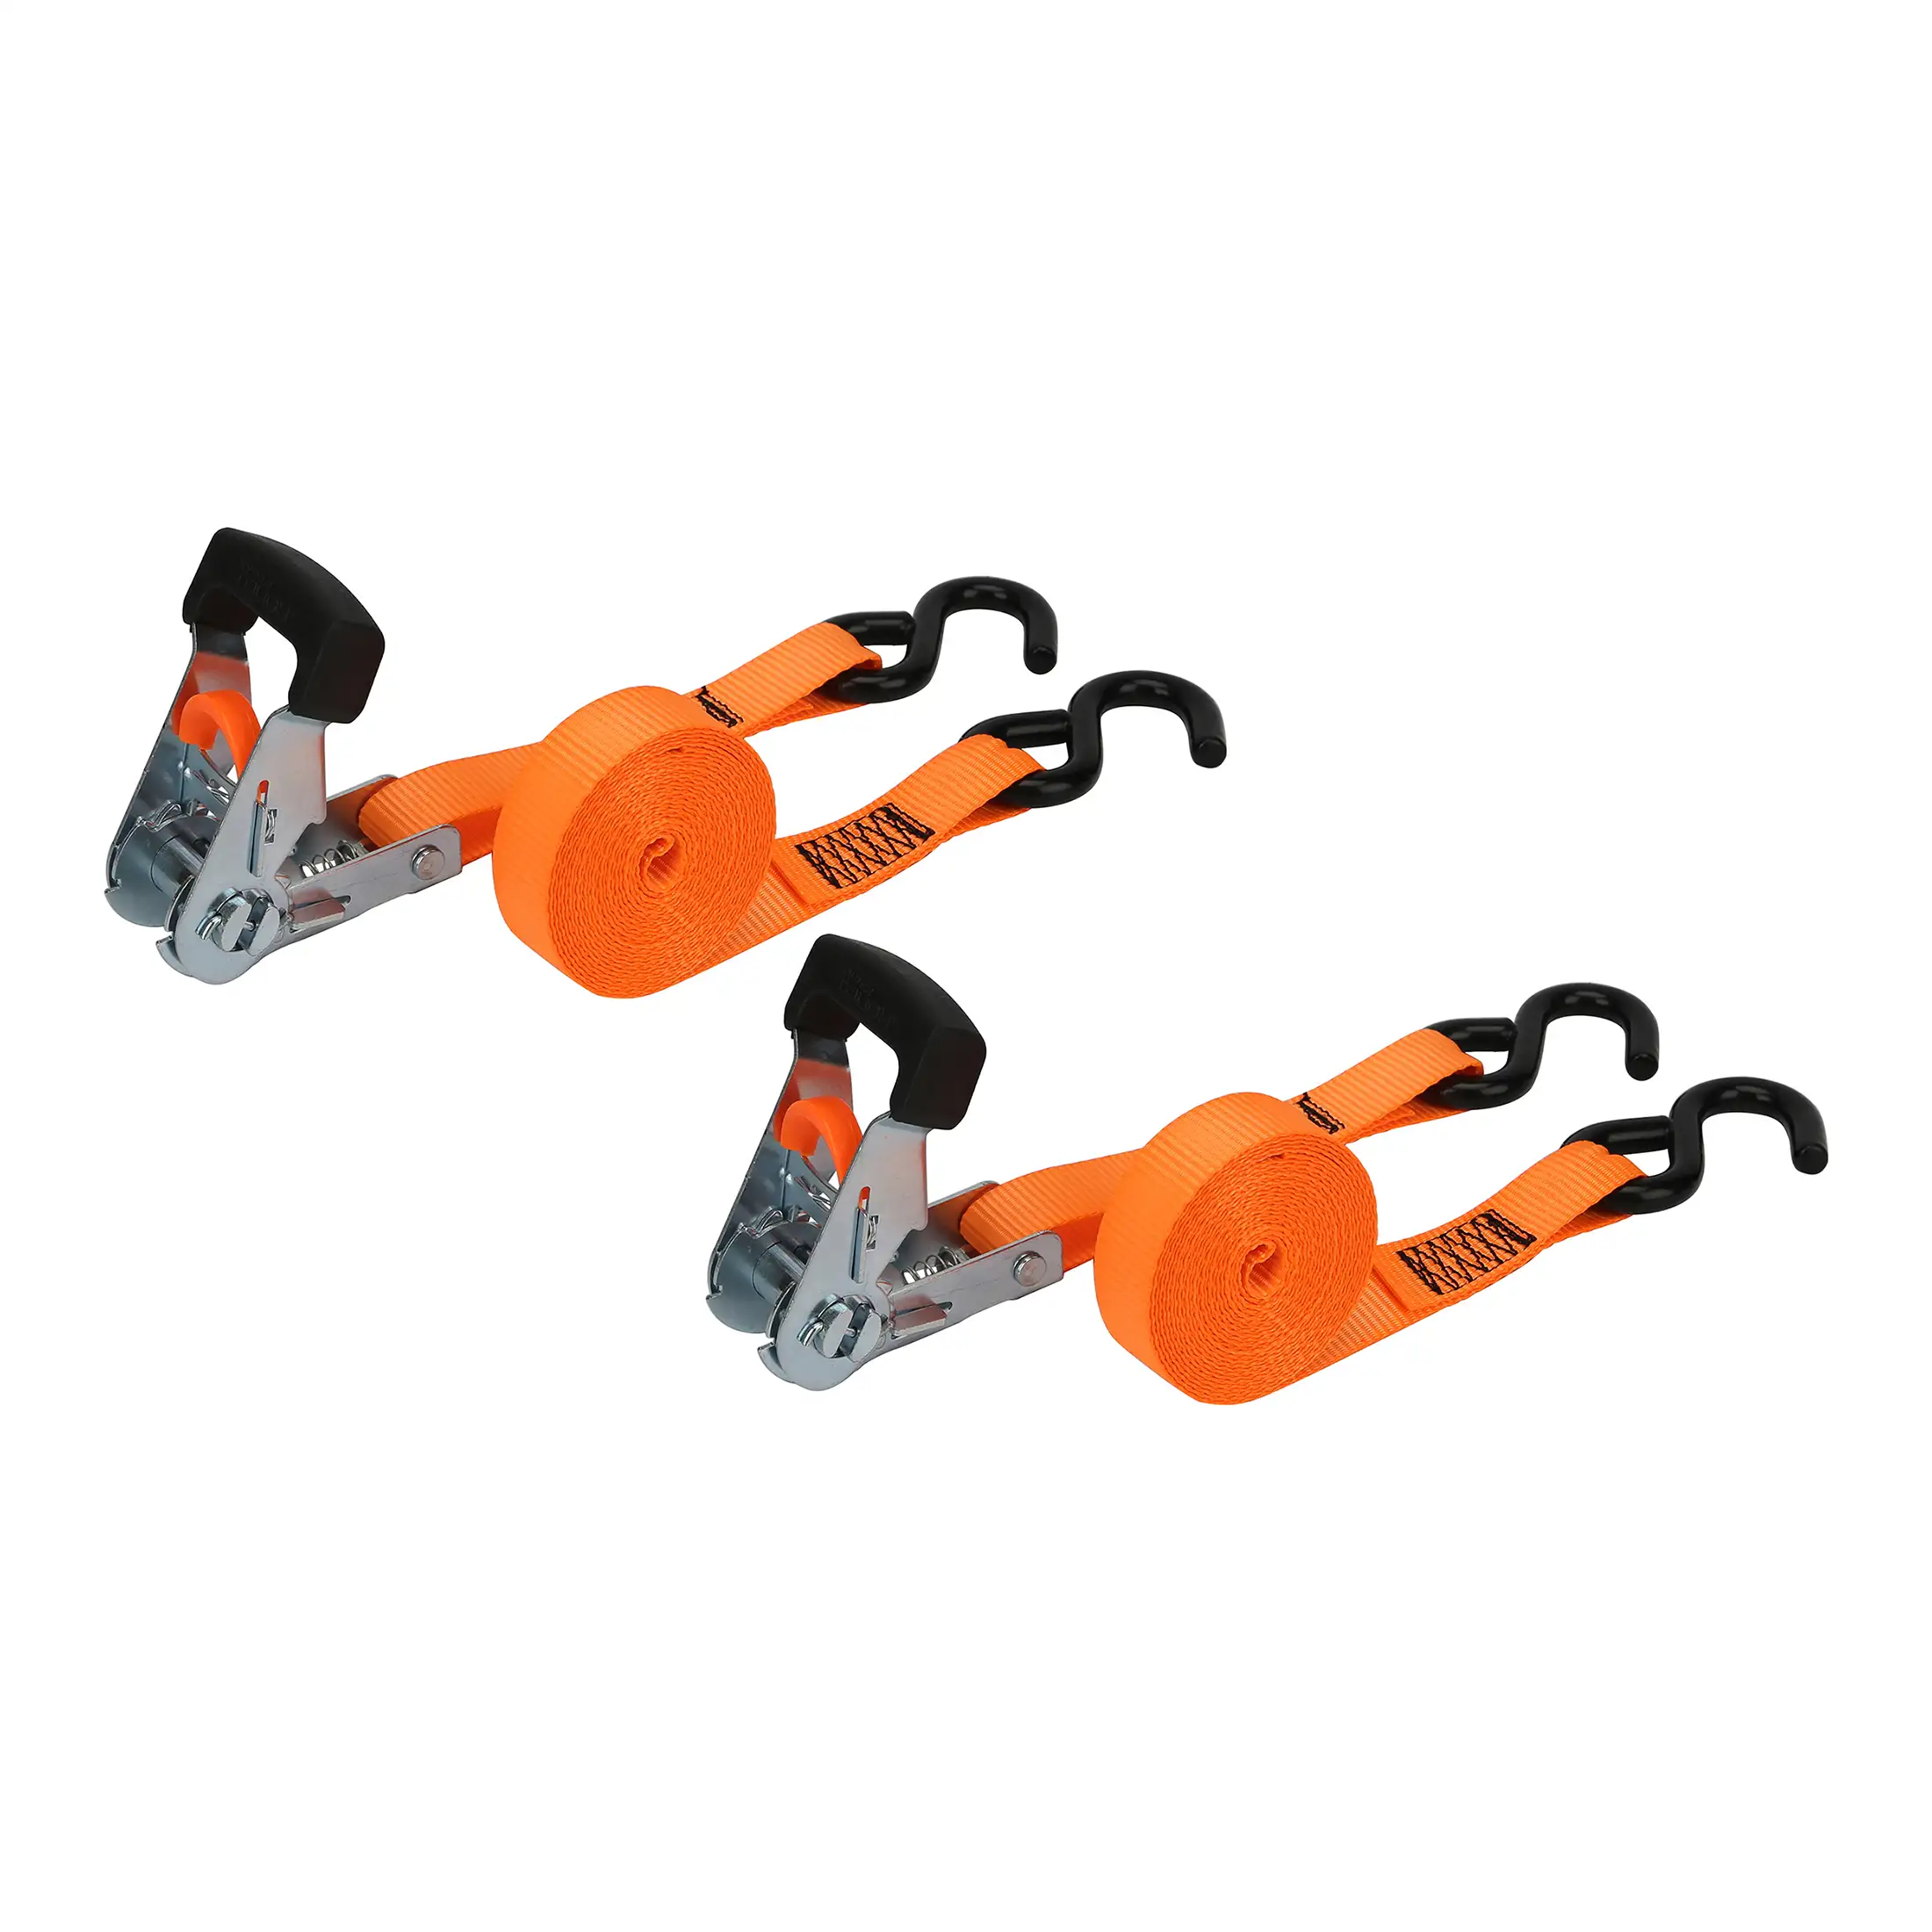 Hyper Tough Brand 1”x14' Tie-Downs Ratchet 1000lbs Work Load with S Hooks  2 - Pack 